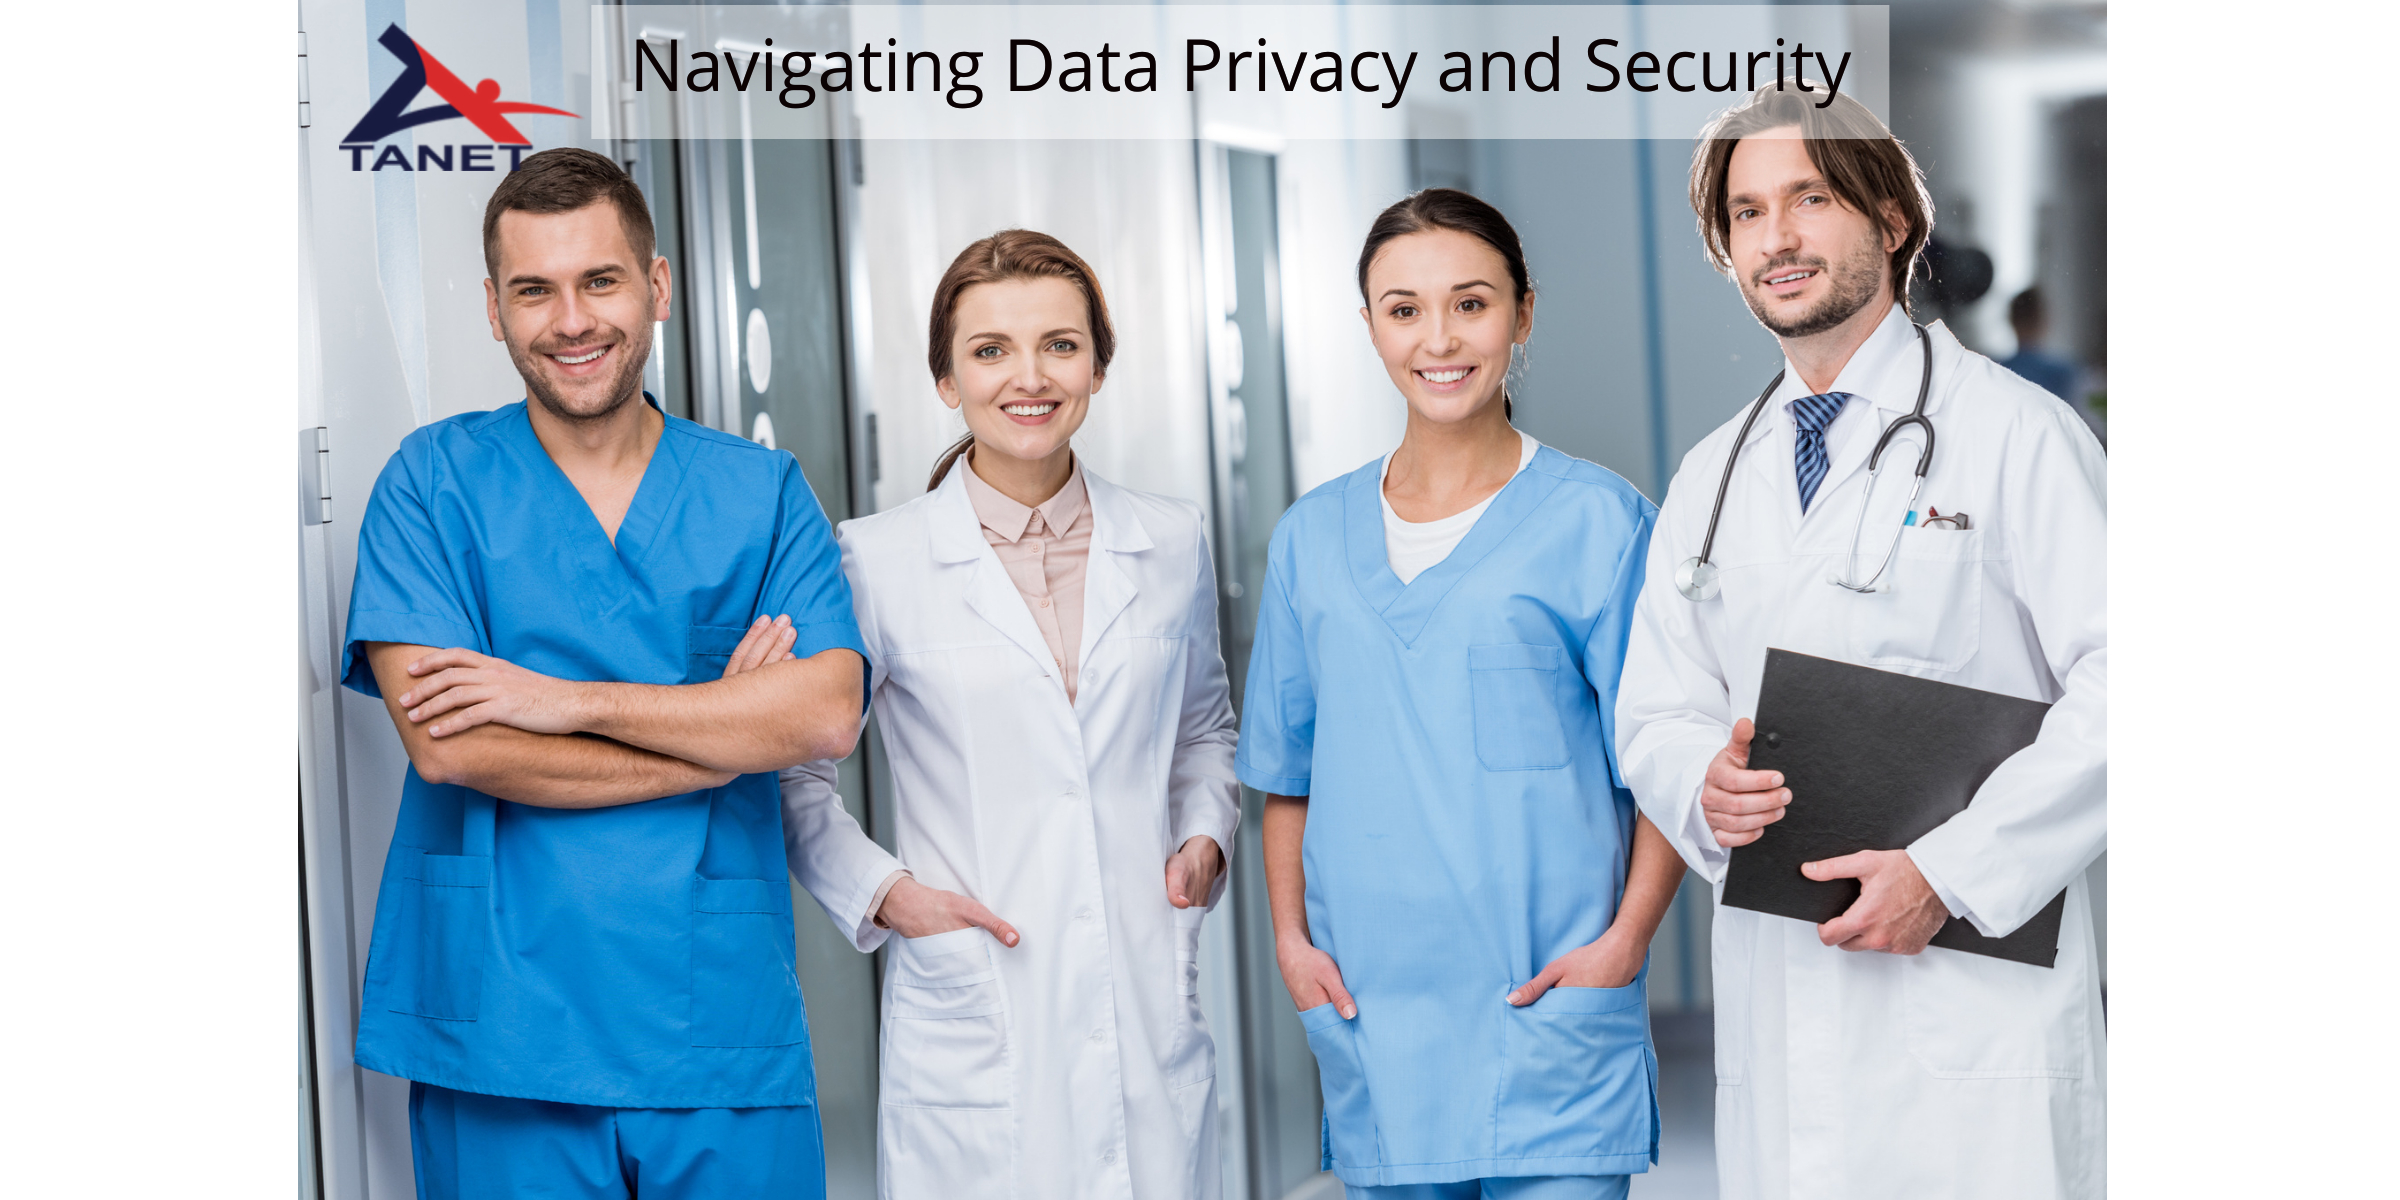 Heathcare Data Privacy and Security